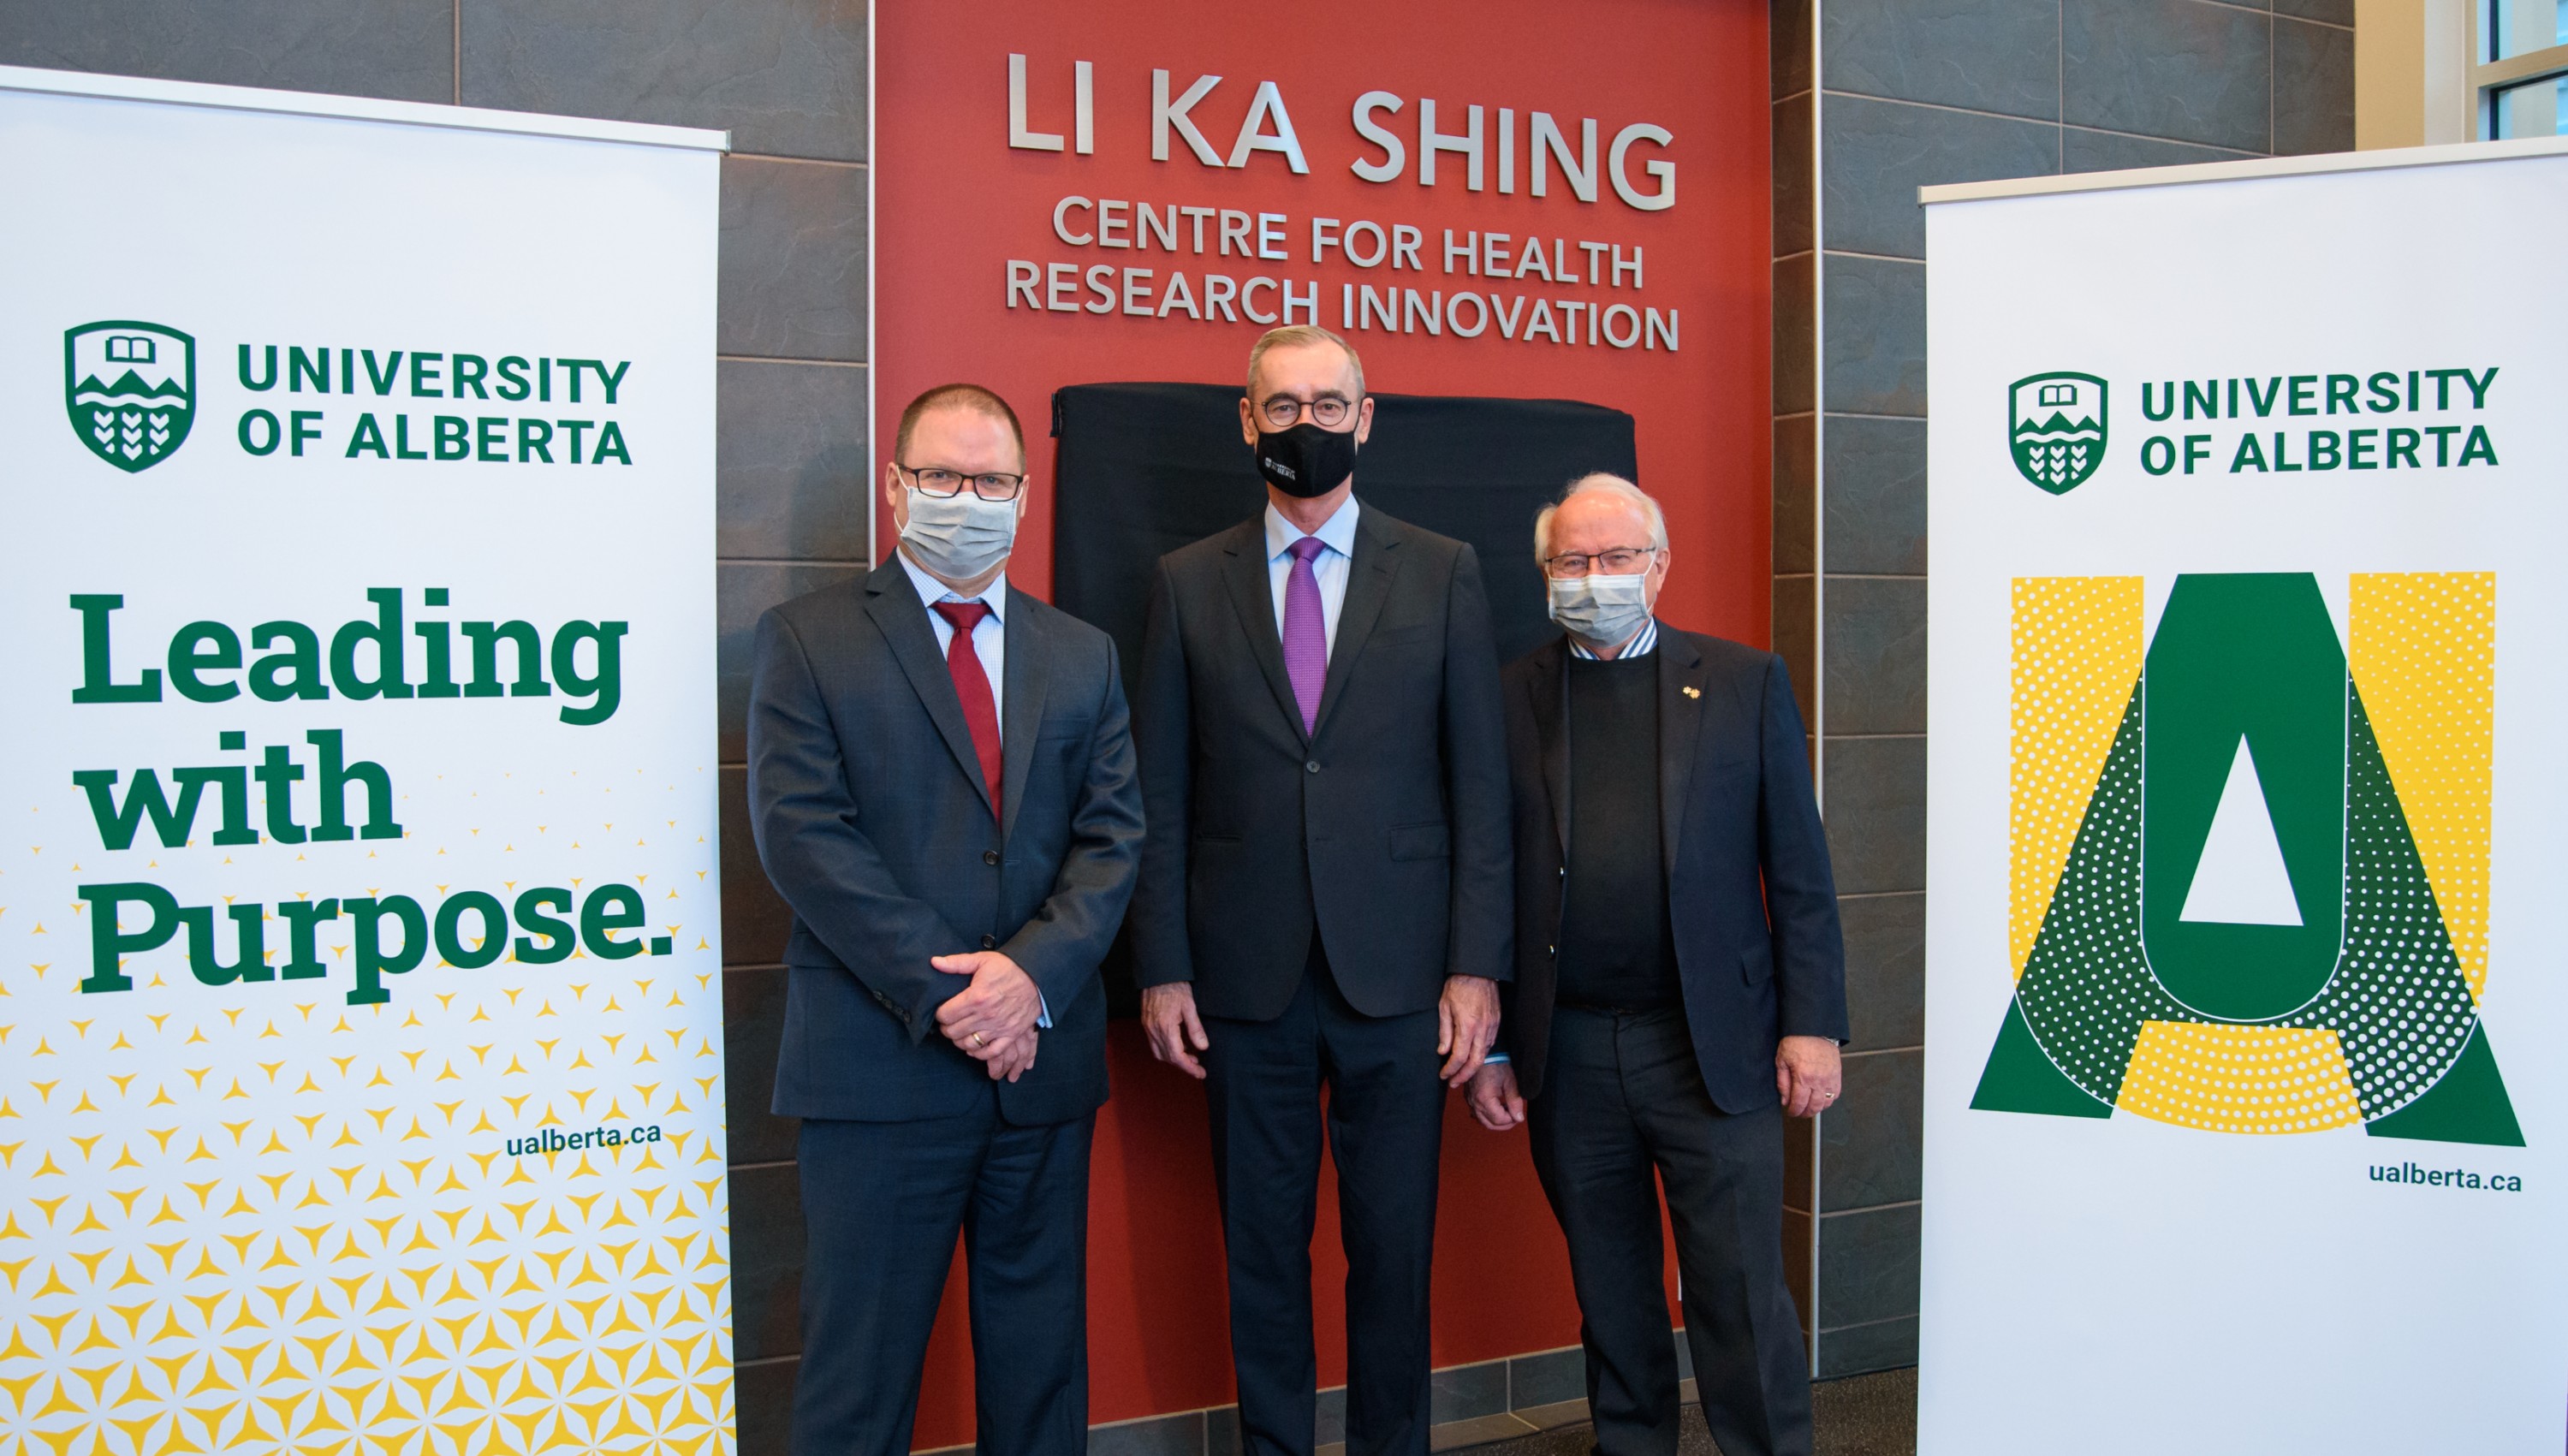 (From left) Virologist Matthias Götte, U of A president Bill Flanagan and virologist Lorne Tyrrell were on hand at an event Dec. 1 announcing $55.1 million in new provincial funding for U of A research to take new vaccines and antiviral drugs from discovery to testing to manufacturing. (Photo: Jordon Hon)